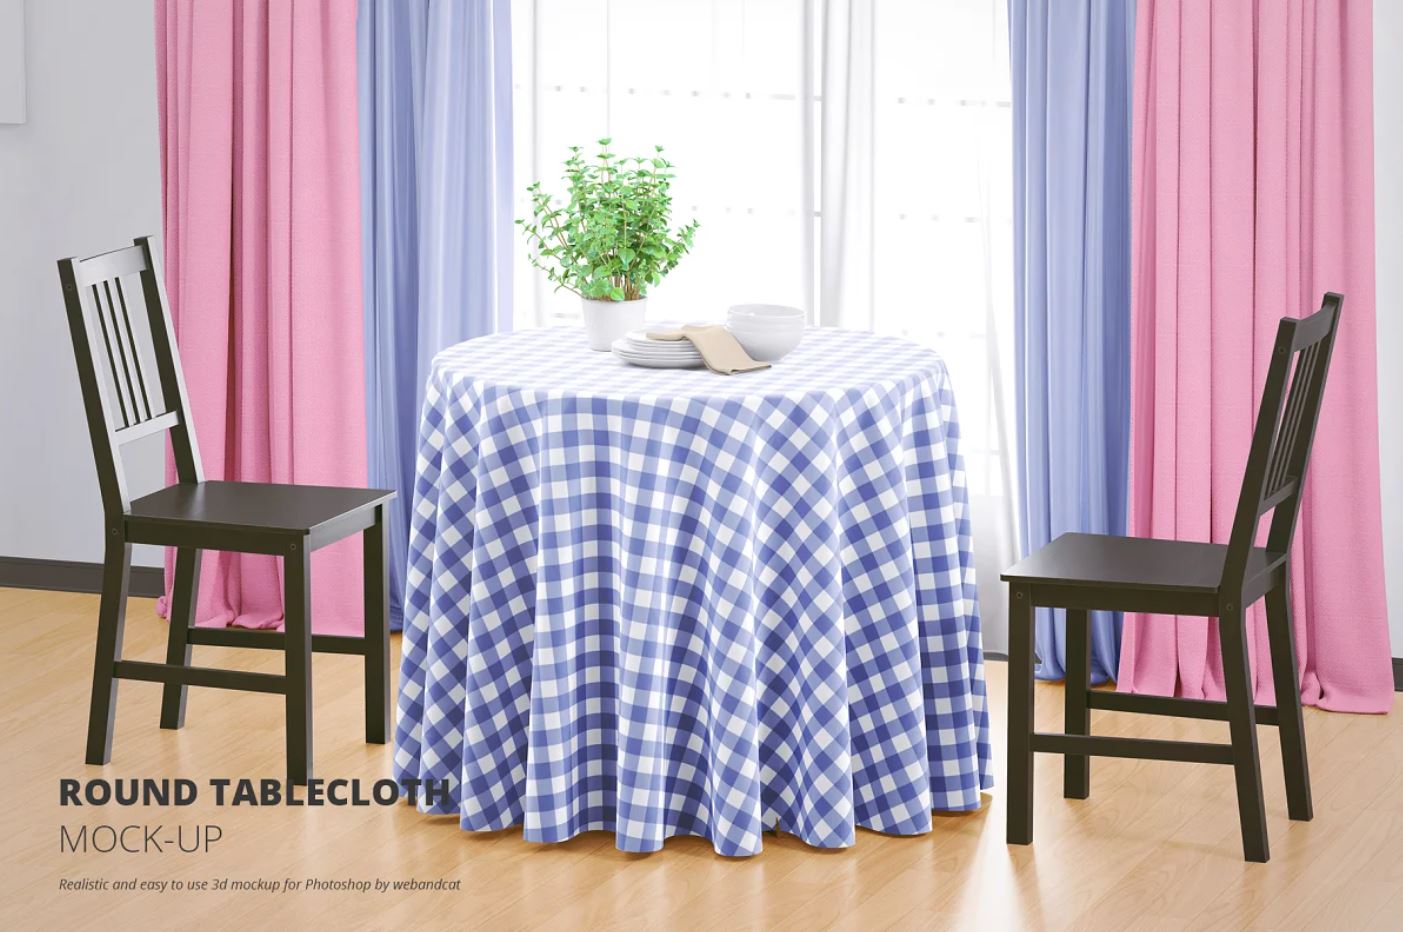 Tablecloth Showcase Mockup on Round Table